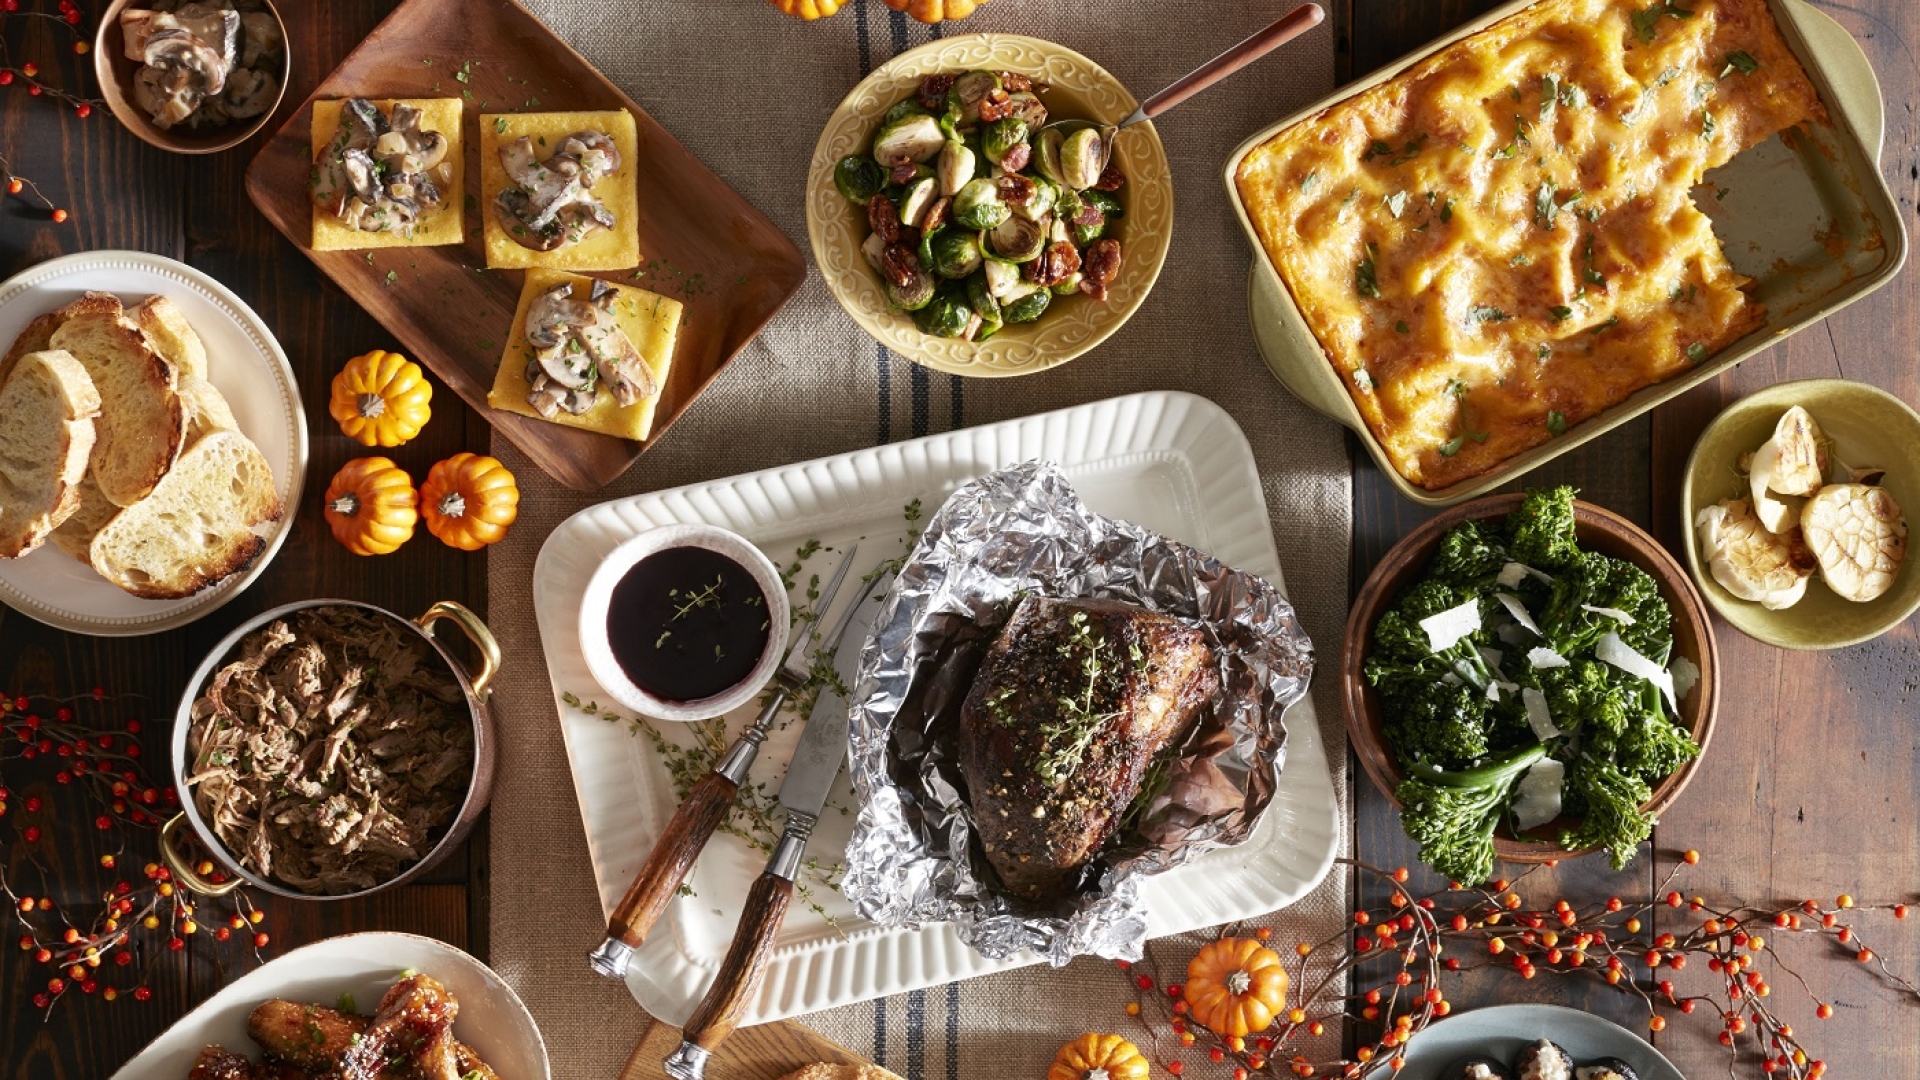 Fall table setting showing foil wrapped pork tenderloin, roasted broccolini and other fall foods